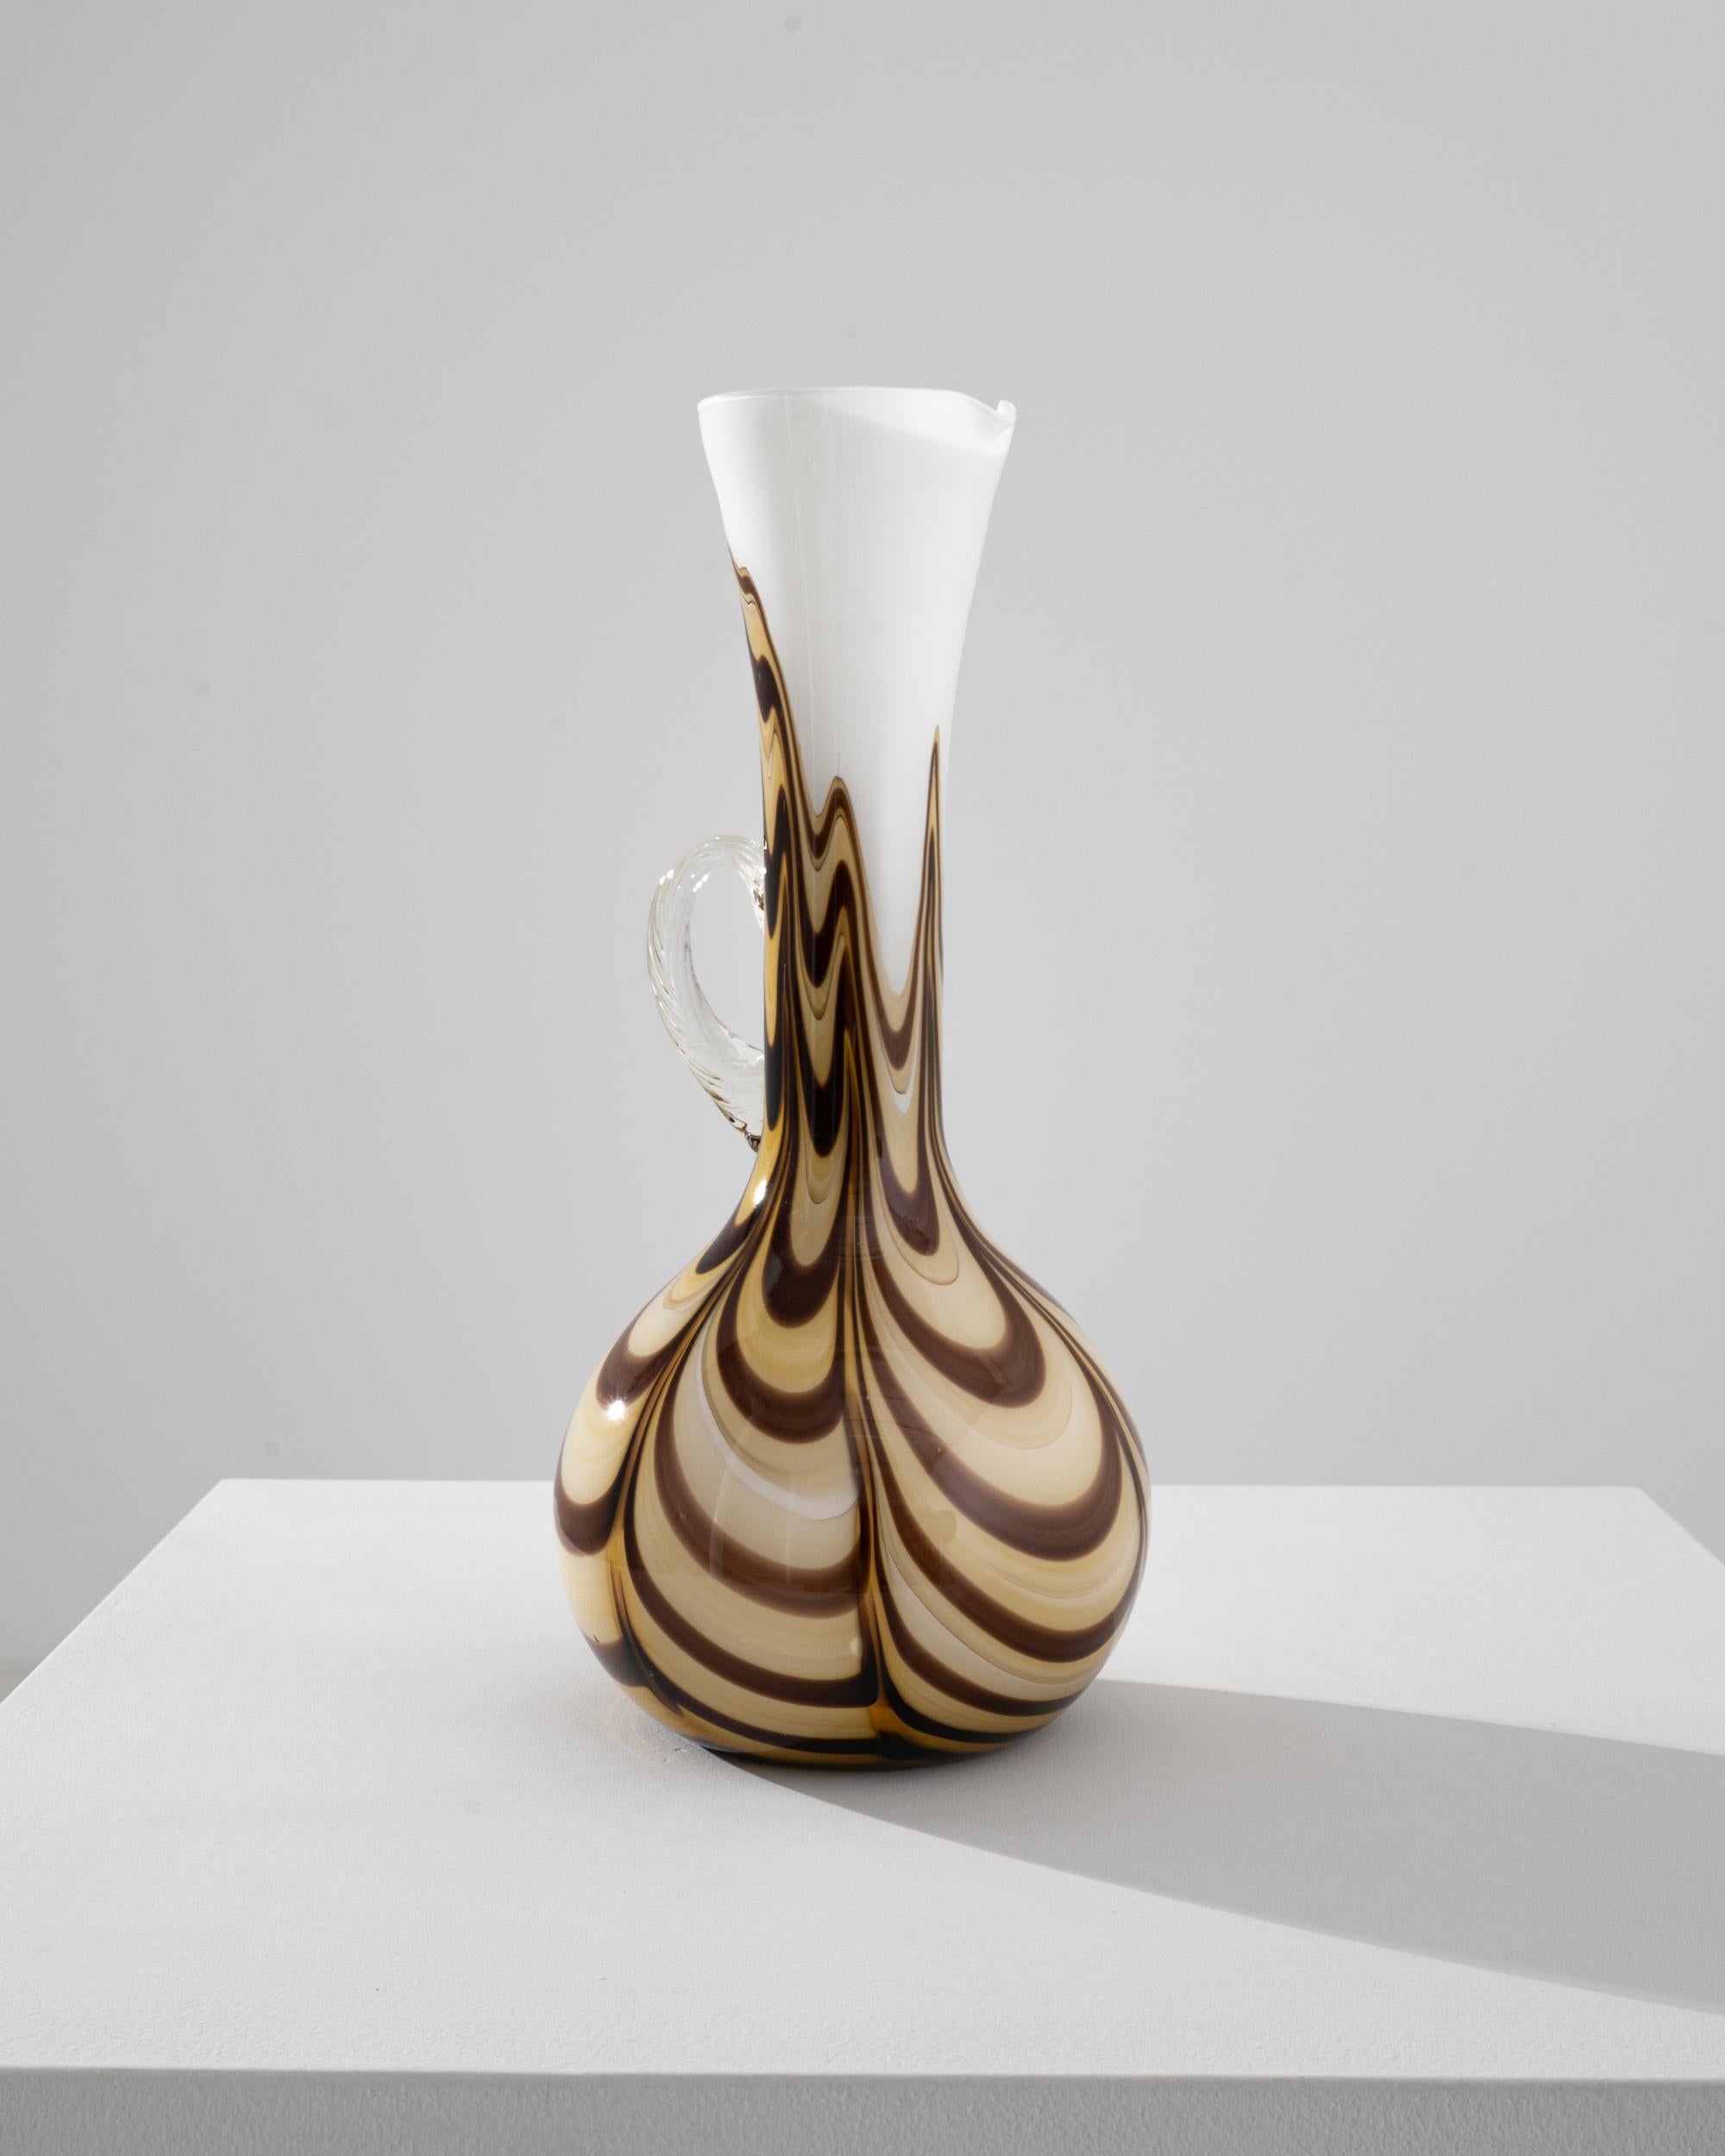 Romantic and striking, this glass vase offers a unique vintage accent. Made in Italy in the 1960s, the shape is elegant and piercing: a slender handle gracefully merges with the colored glass vessel. Beautifully crafted, the semi-translucent glass